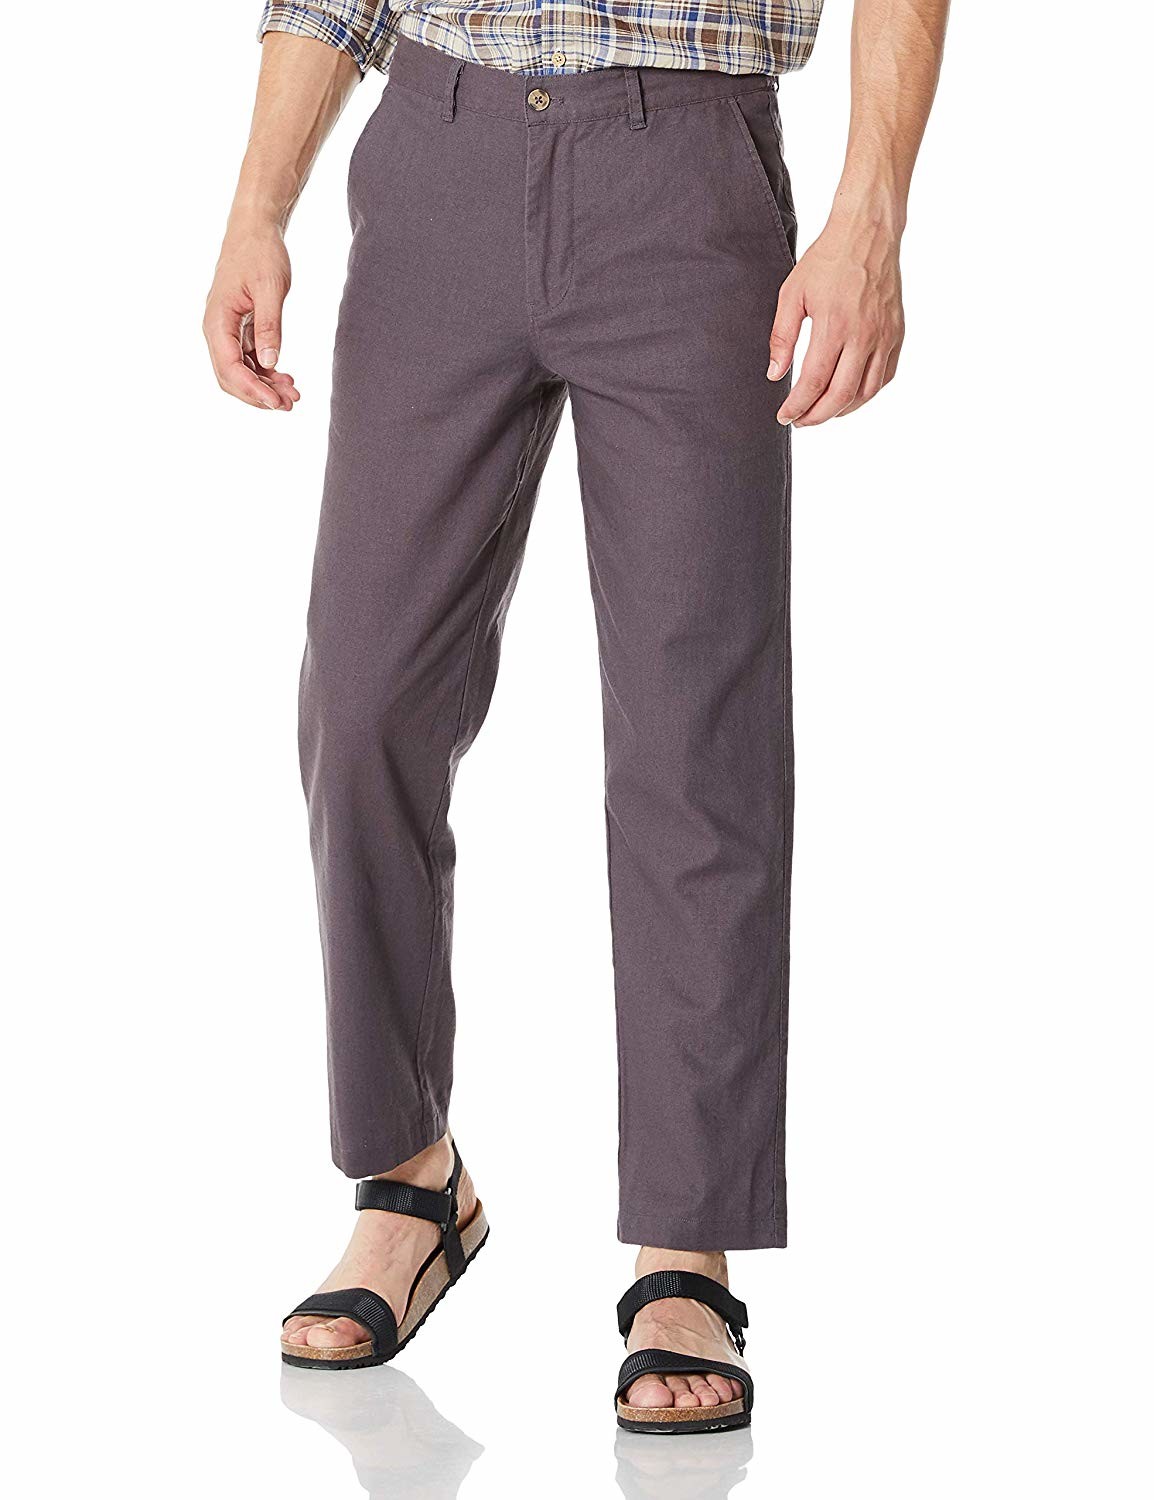 size 40 42 44 Men'S Summer Plain Casual Cotton And Linen Cropped Trousers mid rise